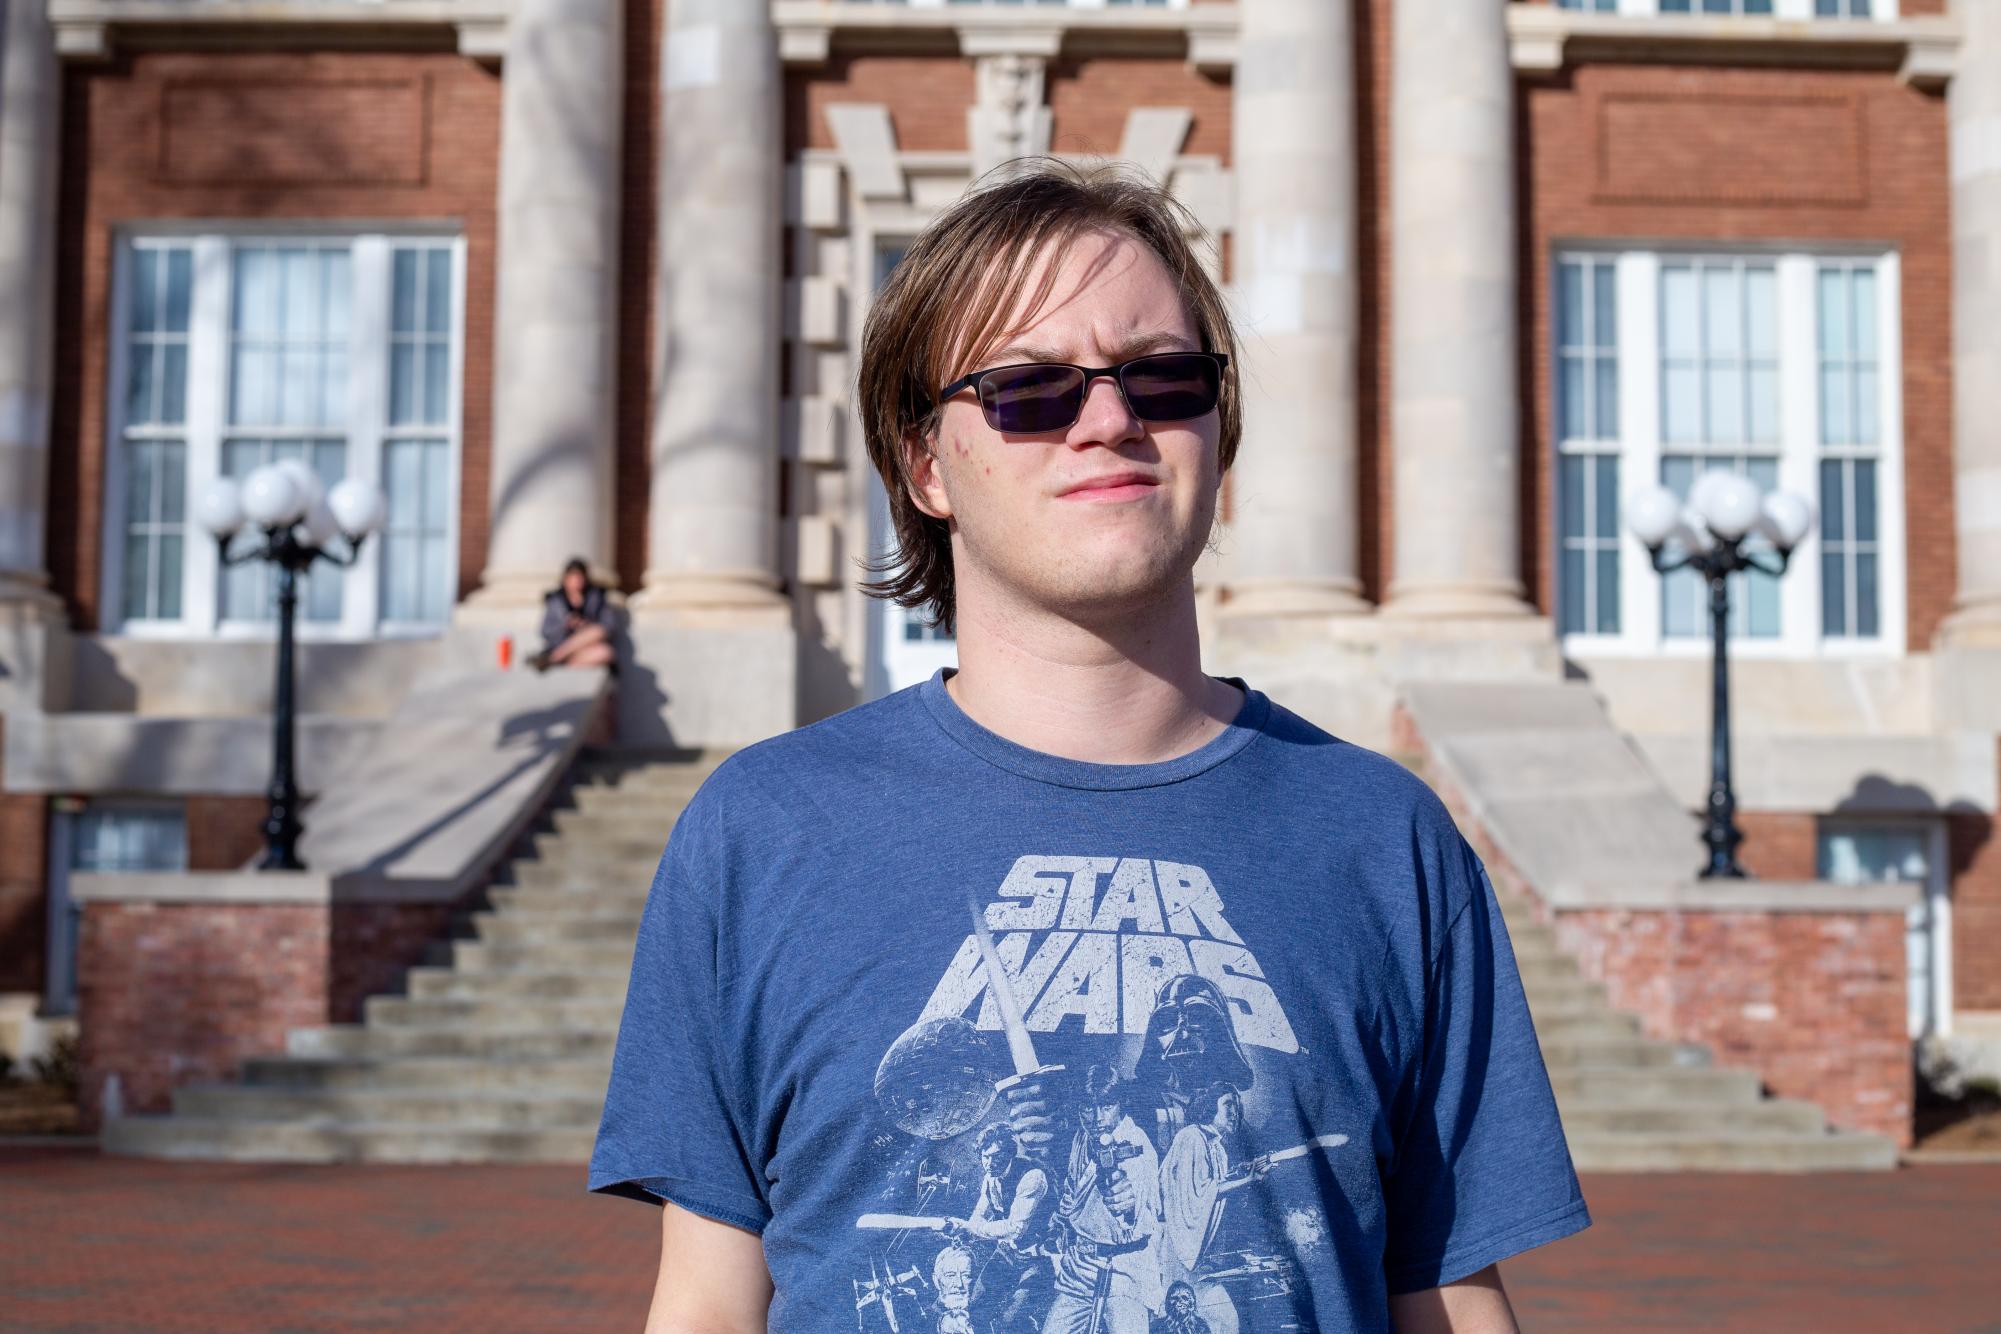 Michael Cassidy is a senior at MSU who wants to share the realities of living with autism.